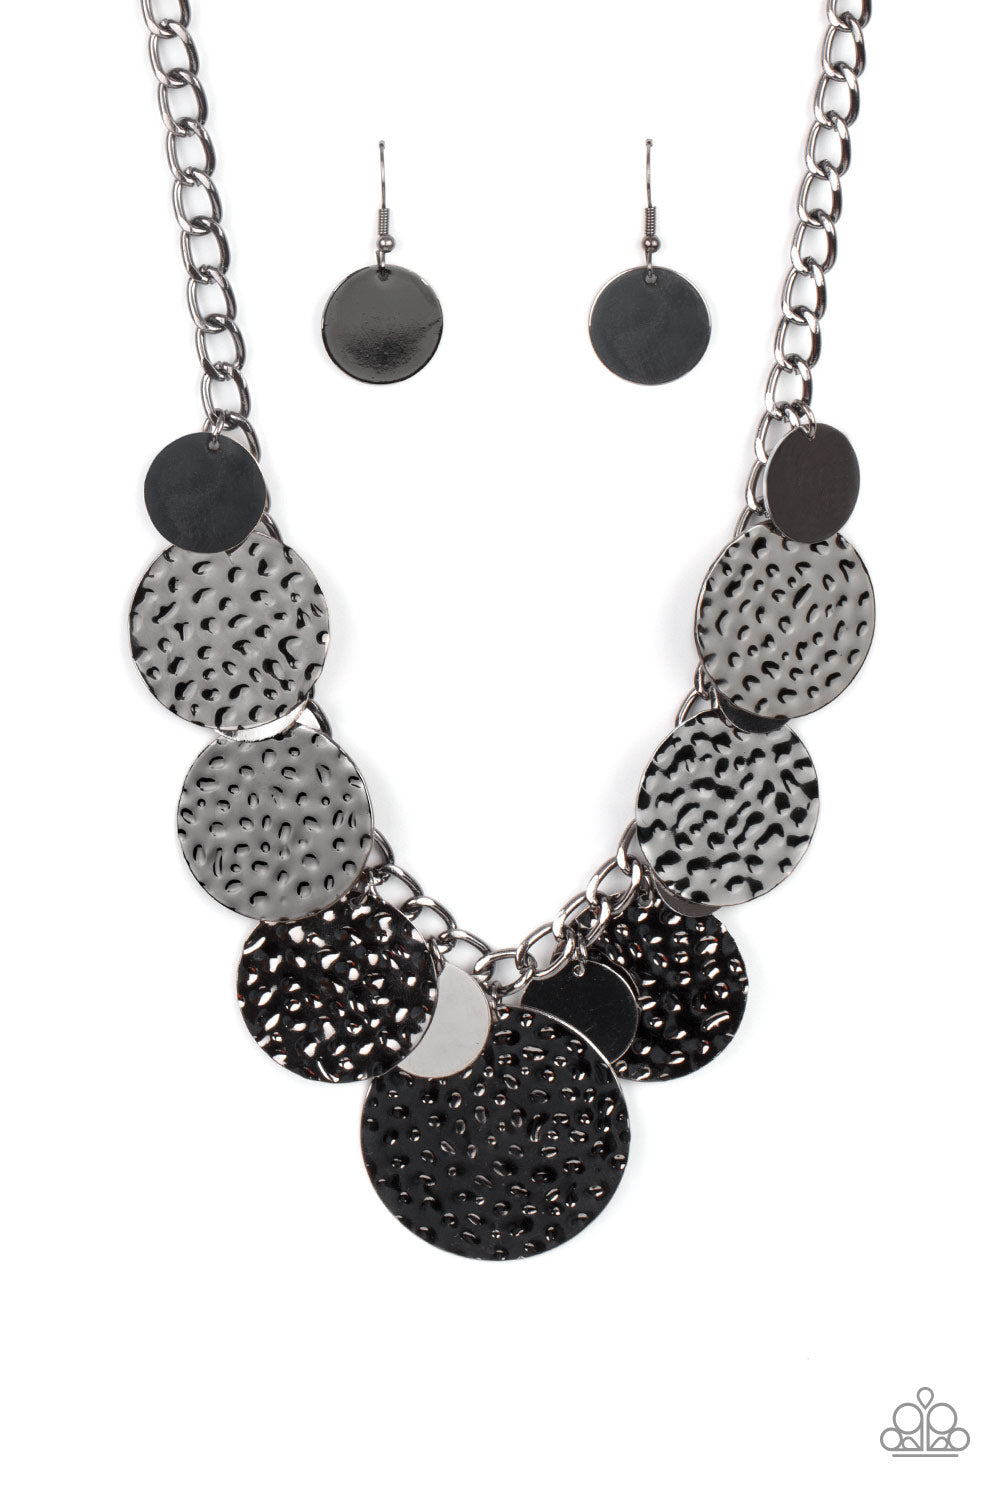 Paparazzi Industrial Grade Glamour - Black Necklace - A Finishing Touch Jewelry